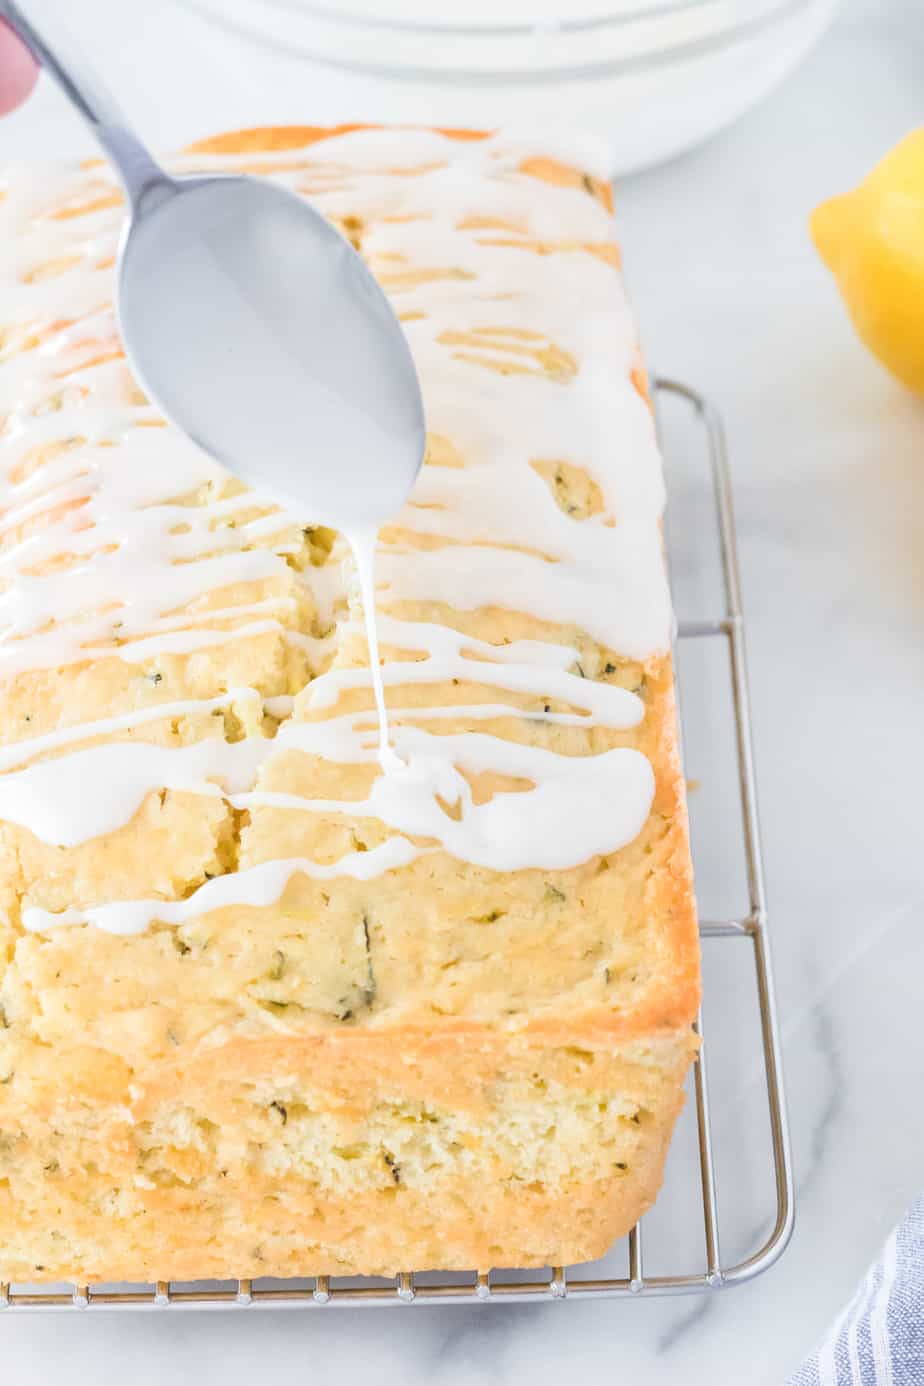 Drizzling lemon glaze with a spoon over the zucchini cake